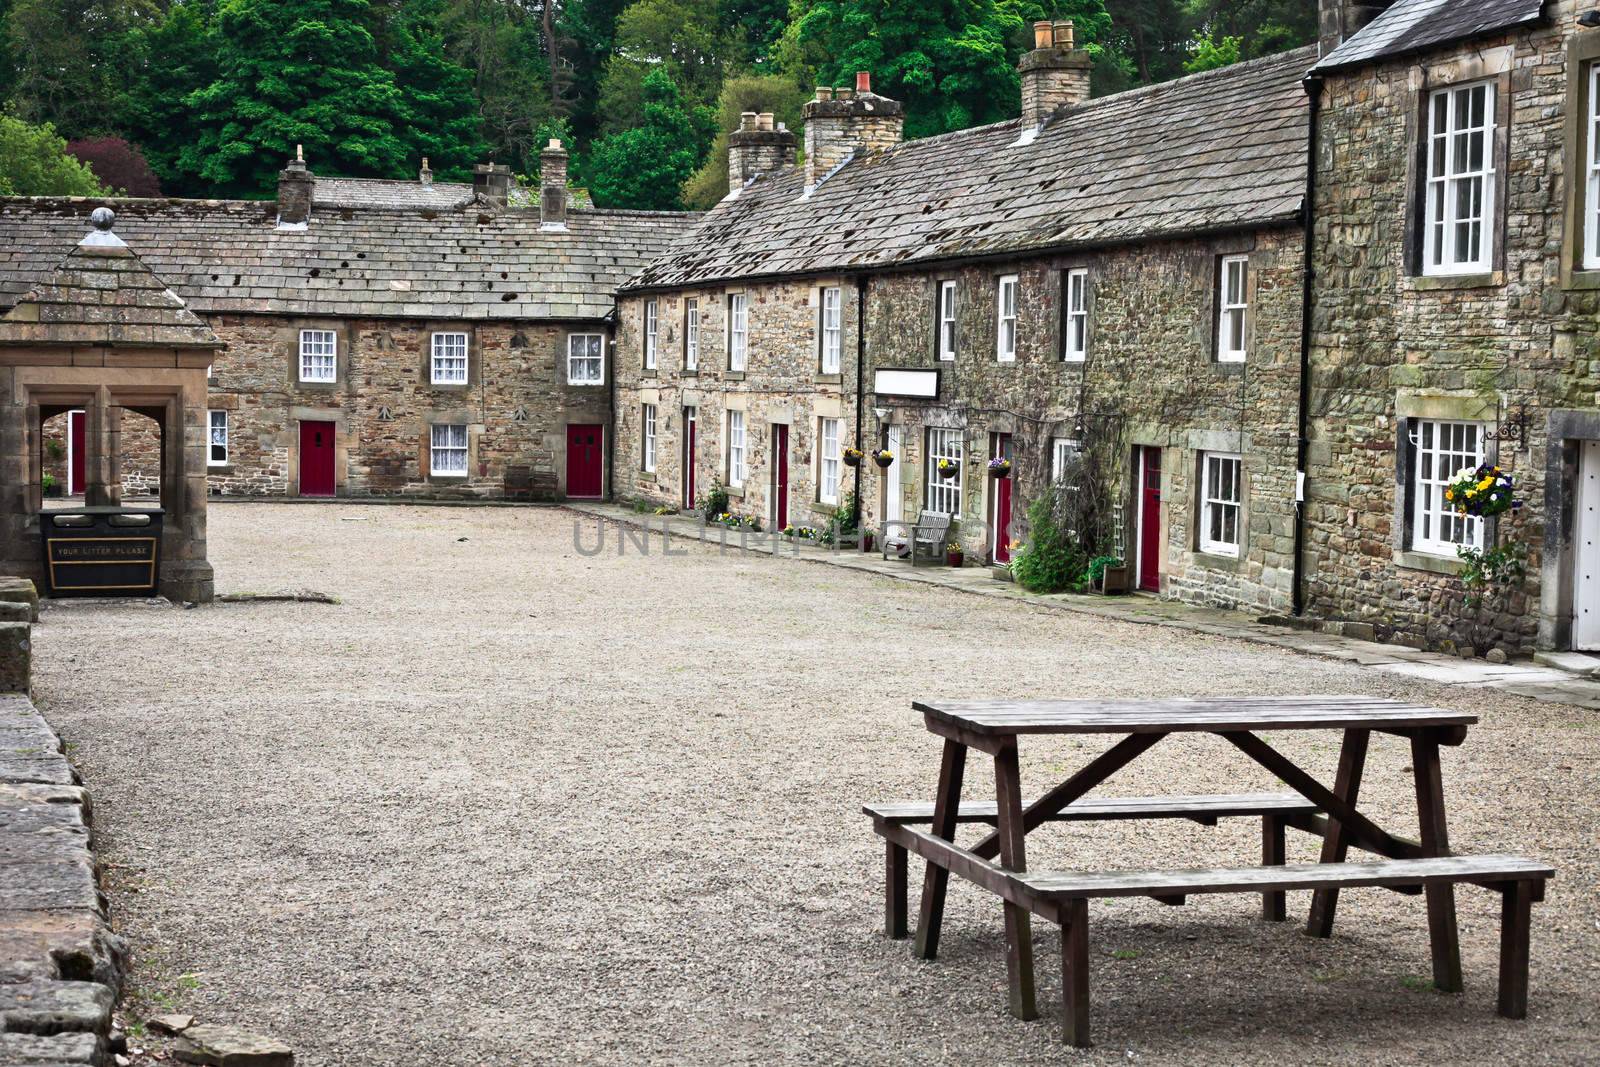 Stone cottages around a courtyard in Blanchland village, Northumberland